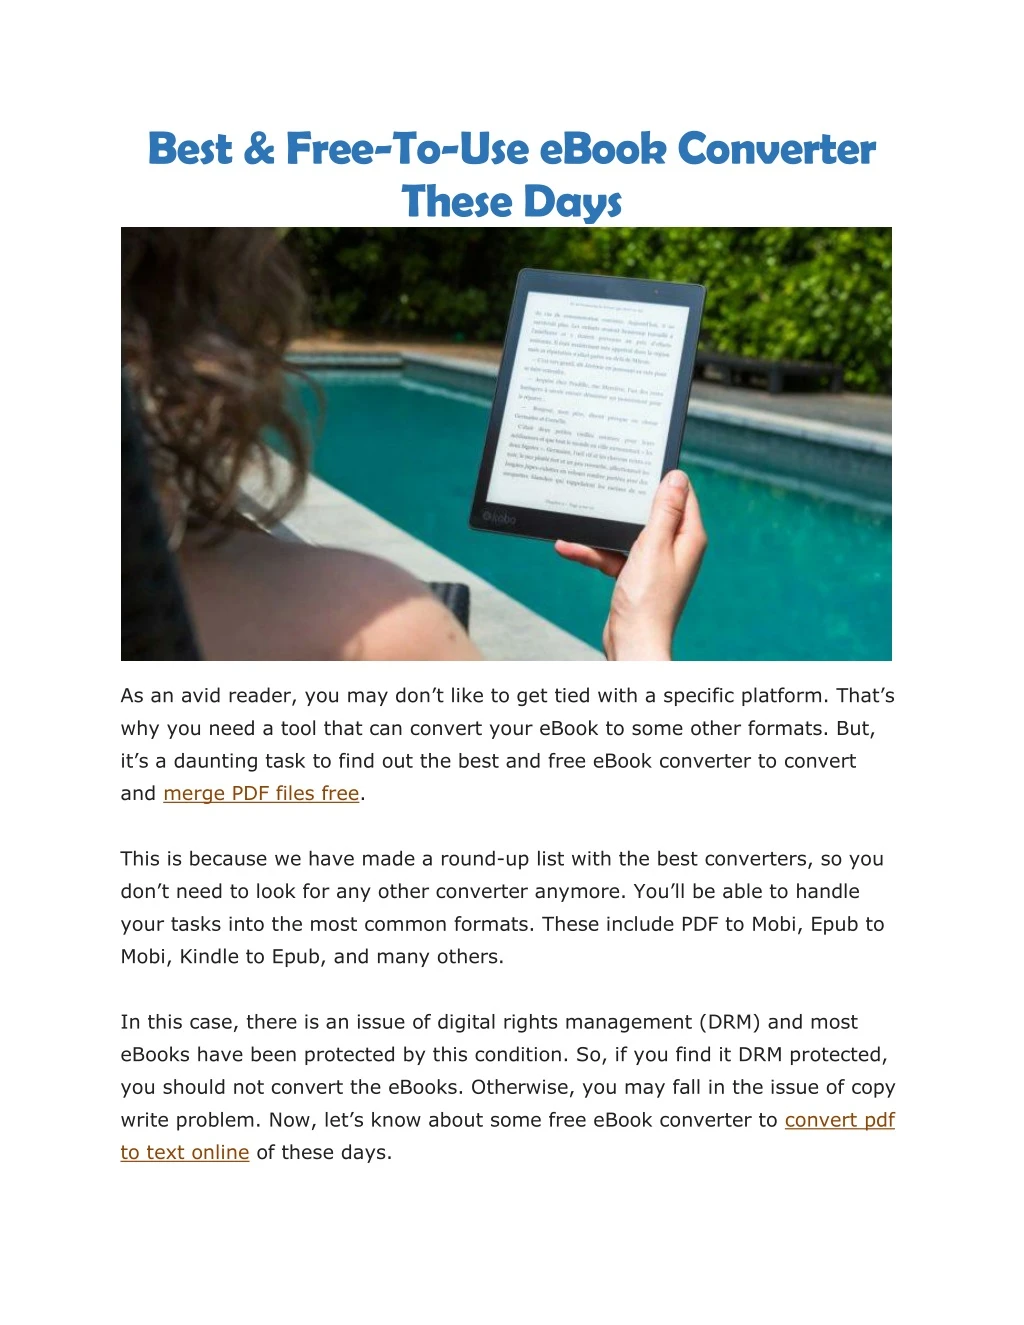 best free to use ebook converter these days